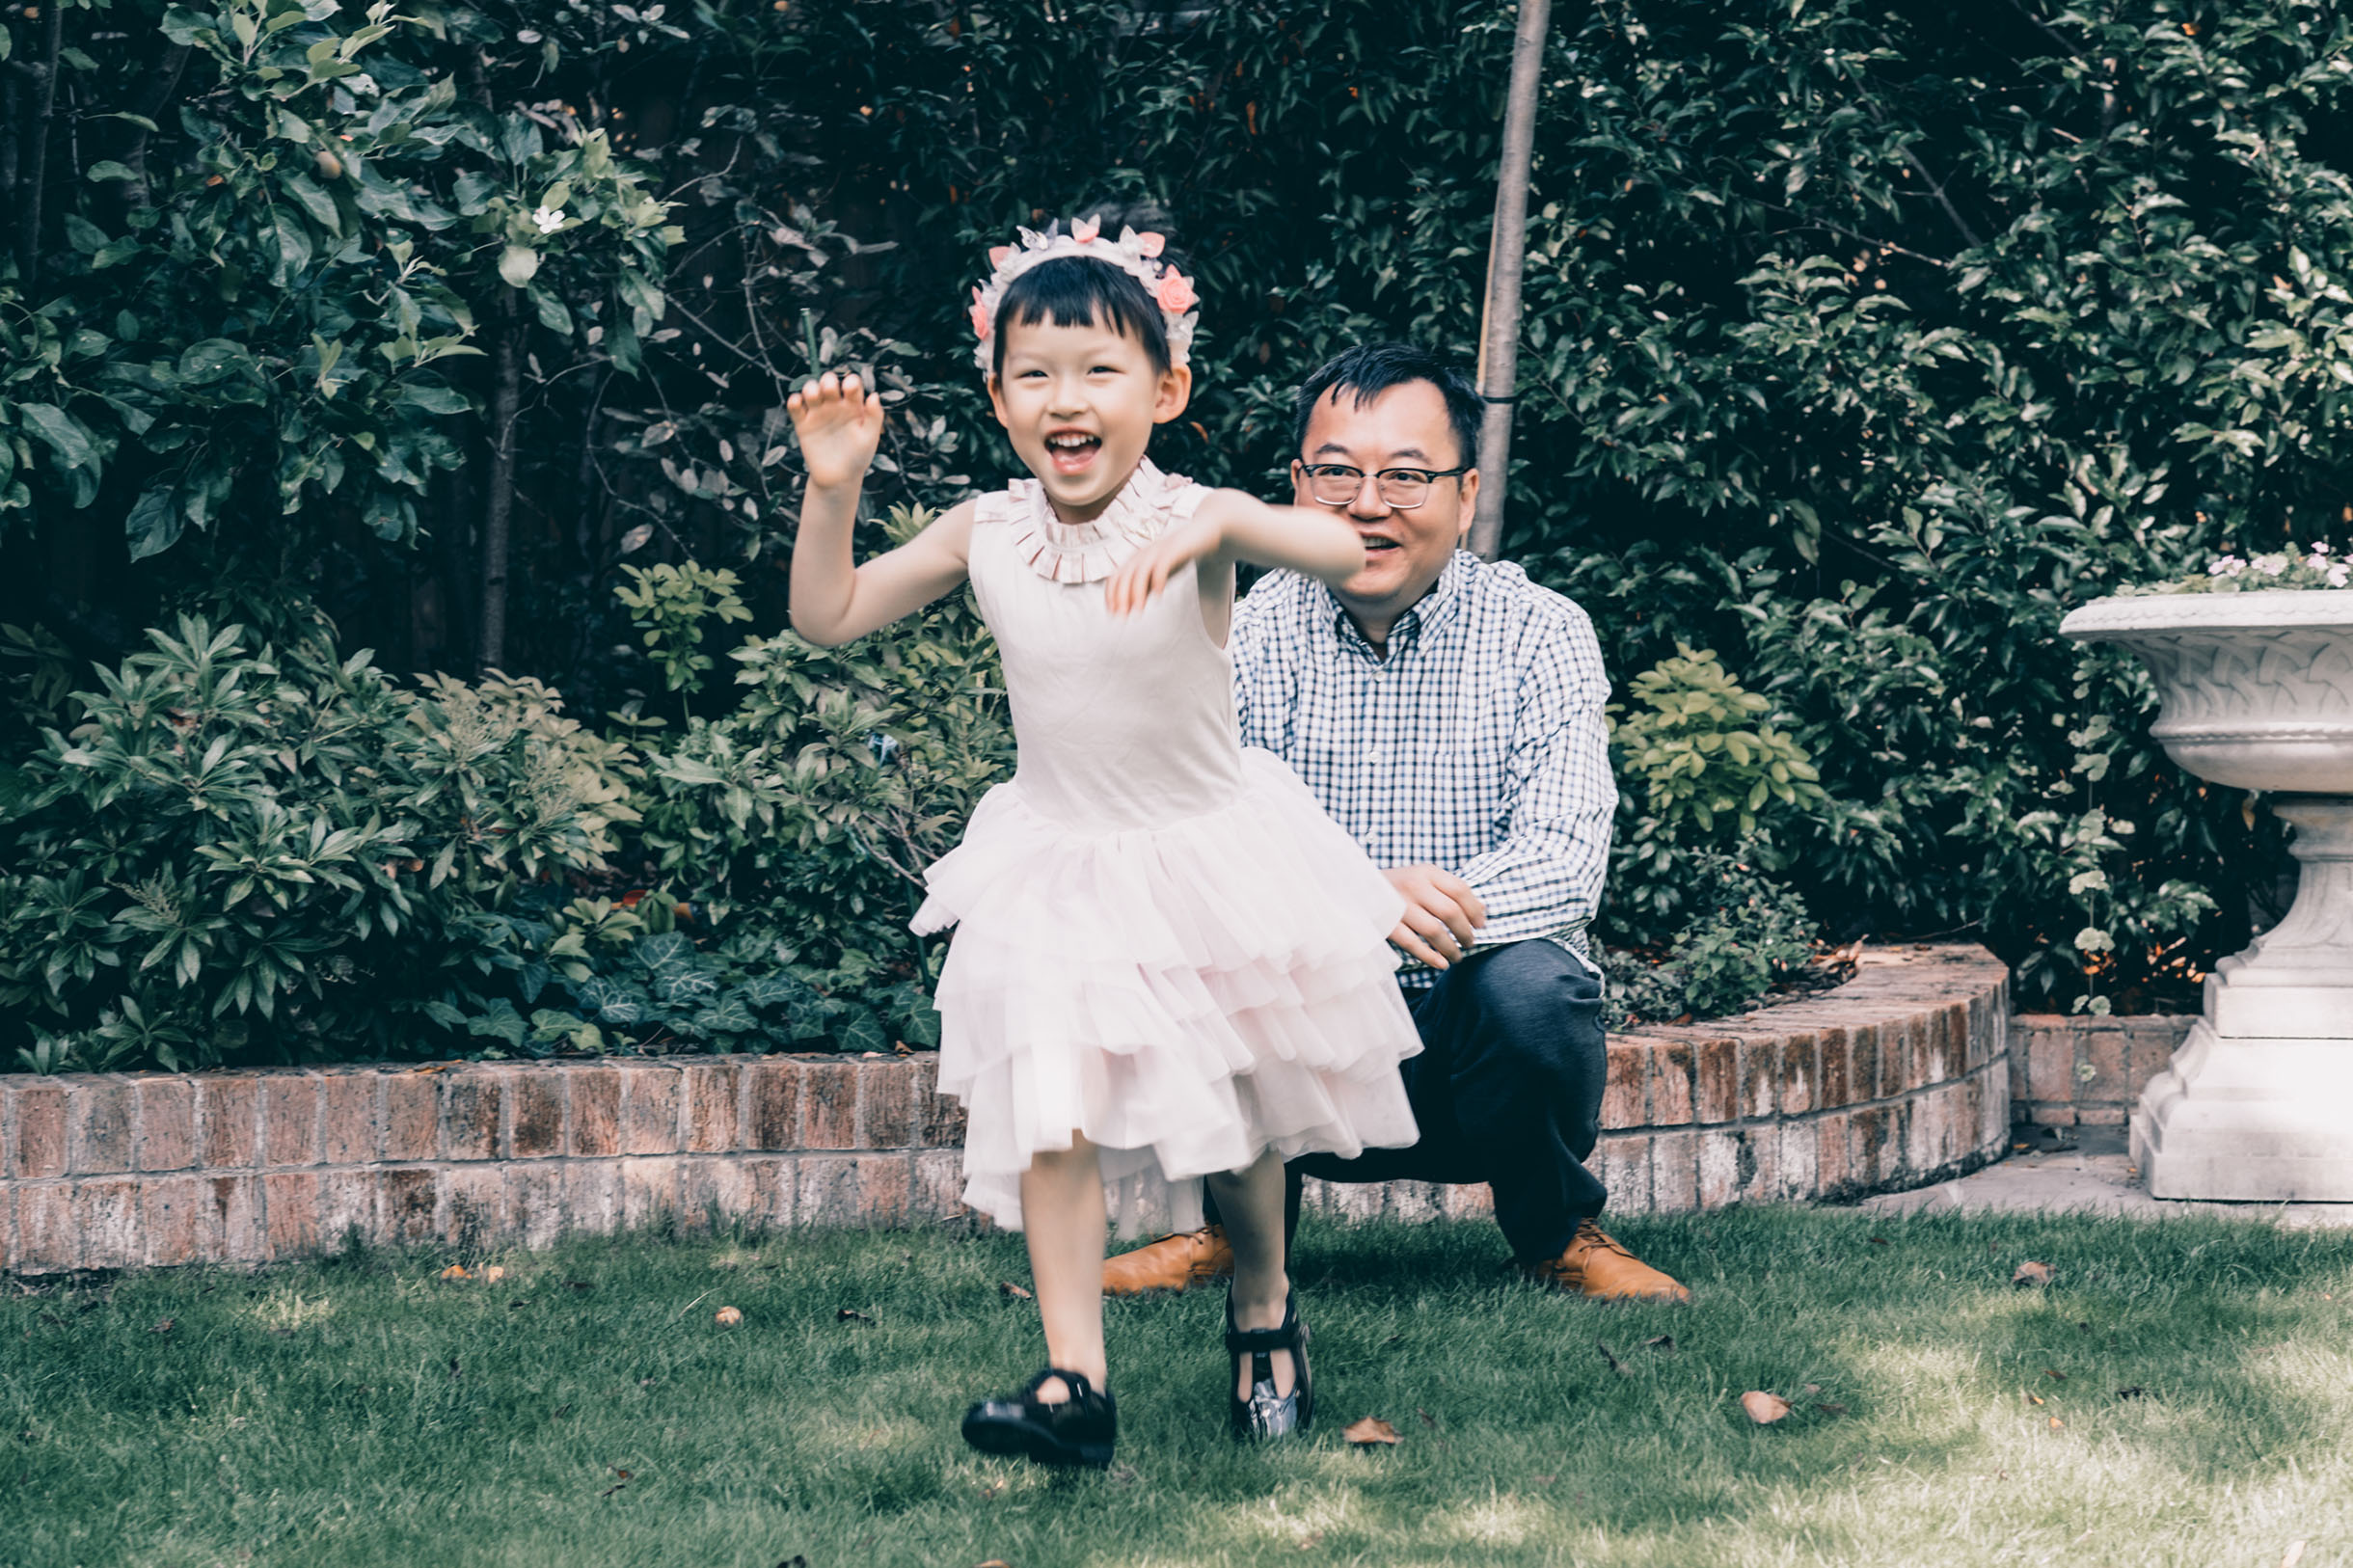 Father looking after her daughter, running in their garden, enjoying the day while being captured for family portrait photography.